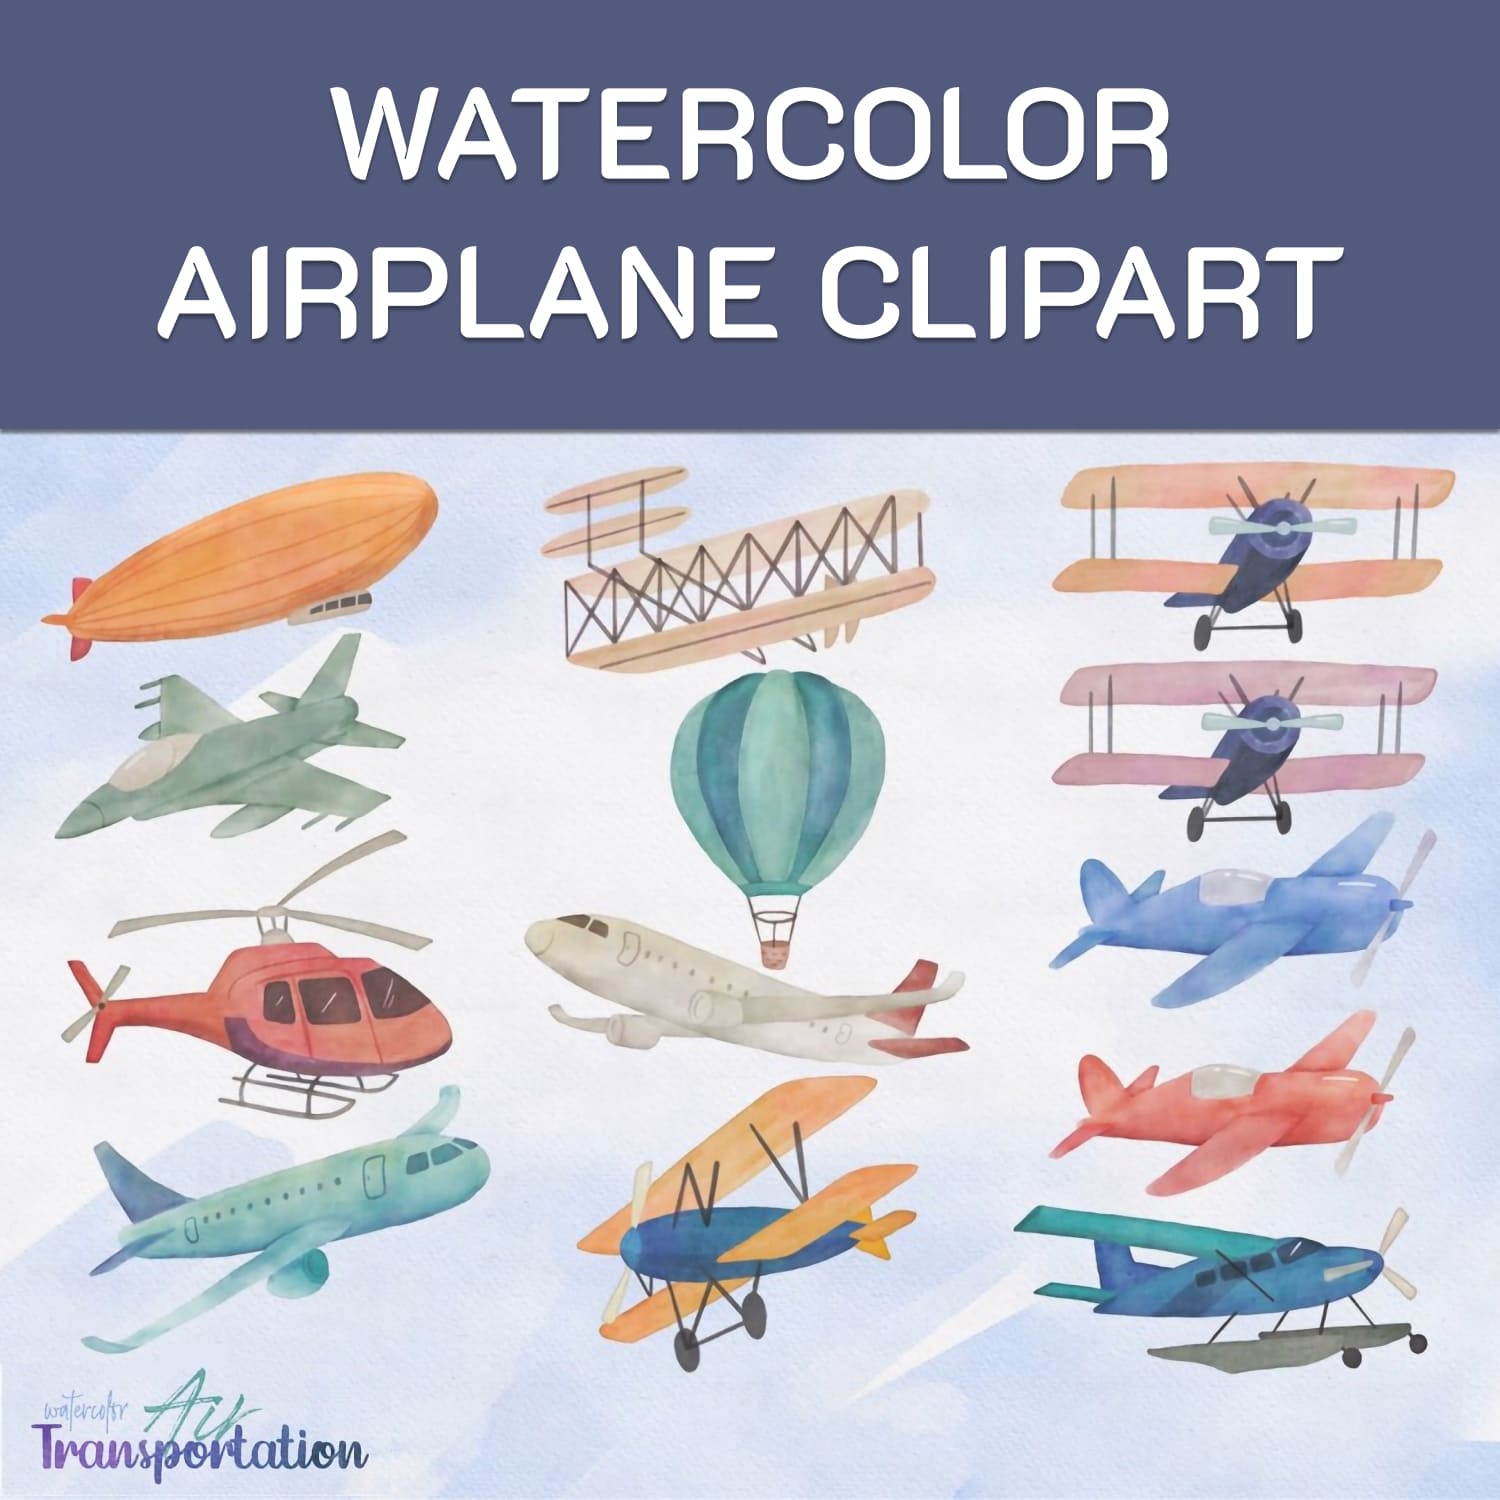 Watercolor Airplane Clipart.